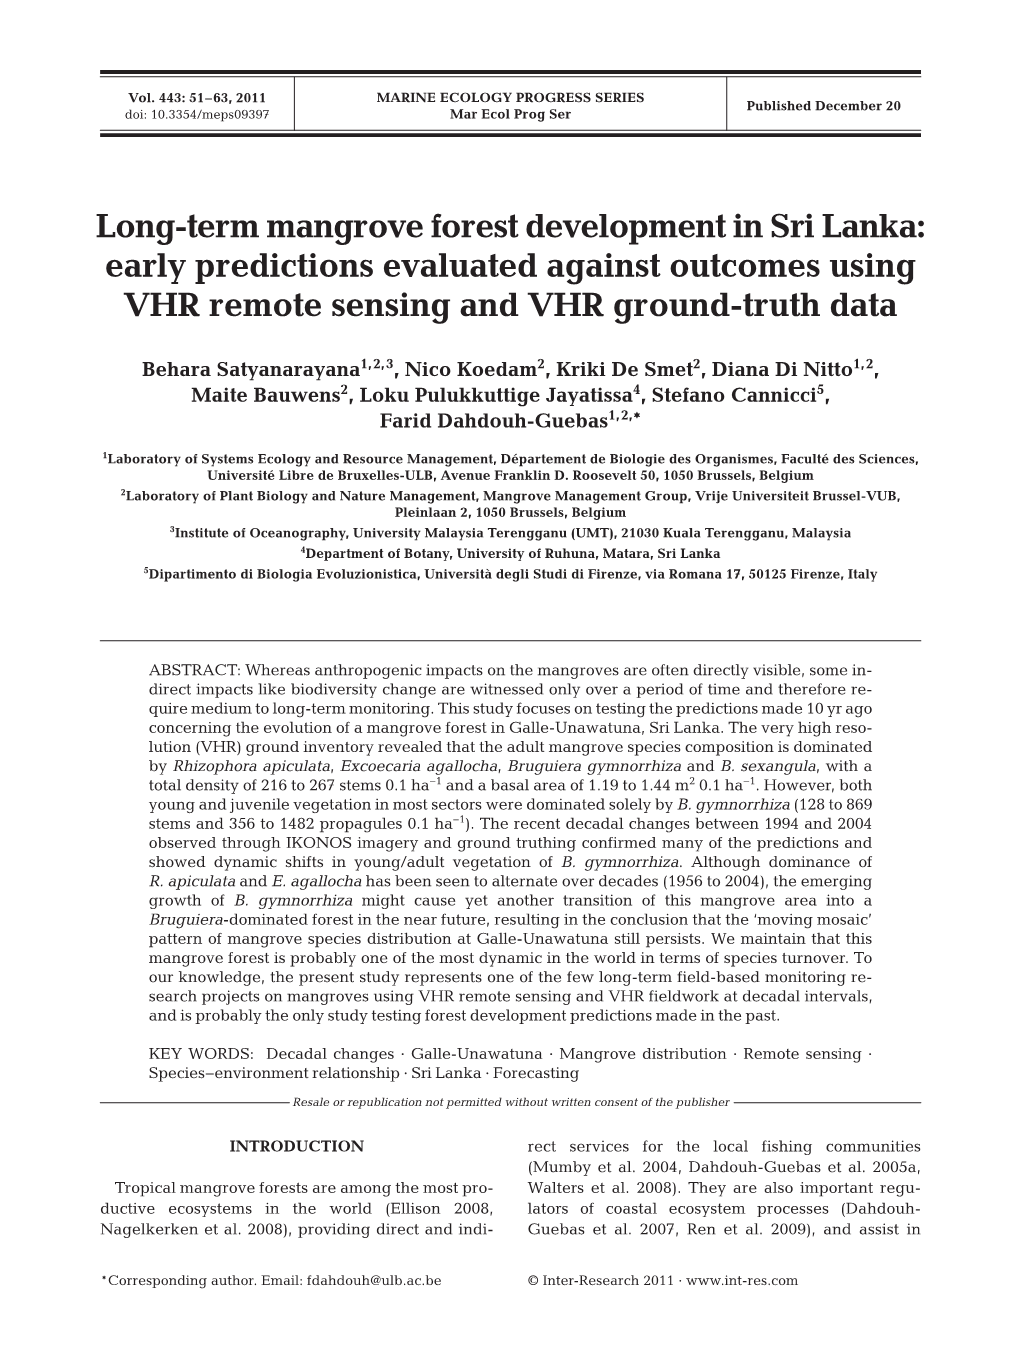 Long-Term Mangrove Forest Development in Sri Lanka: Early Predictions Evaluated Against Outcomes Using VHR Remote Sensing and VHR Ground-Truth Data